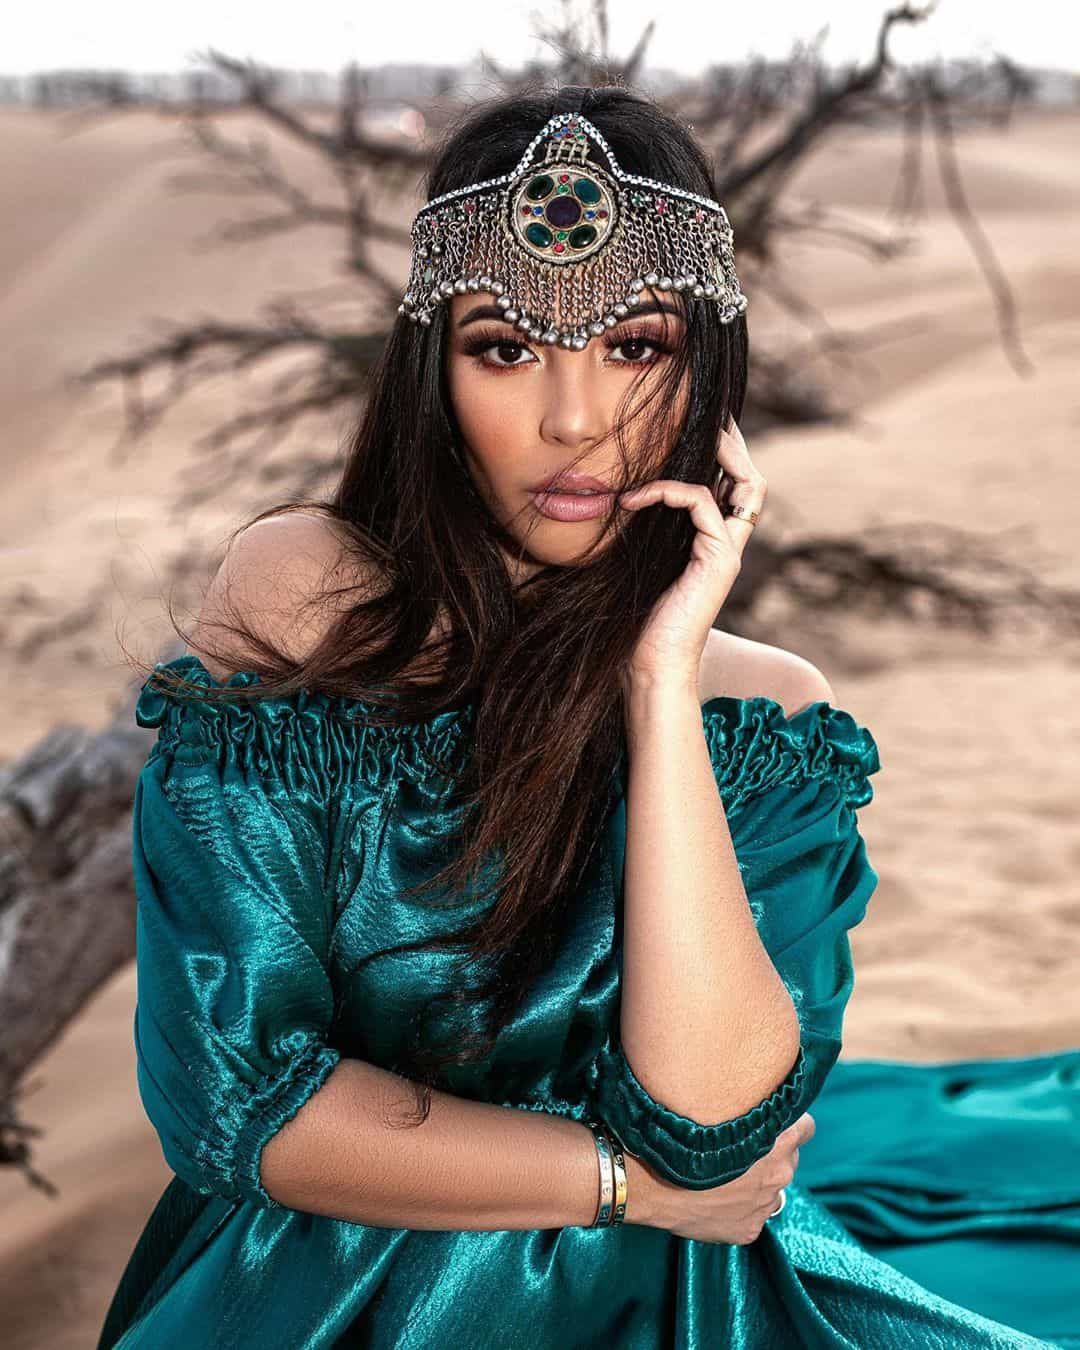 A woman wearing tiara and green dress stands in the Dubai desert, with sand dunes stretching out behind her.